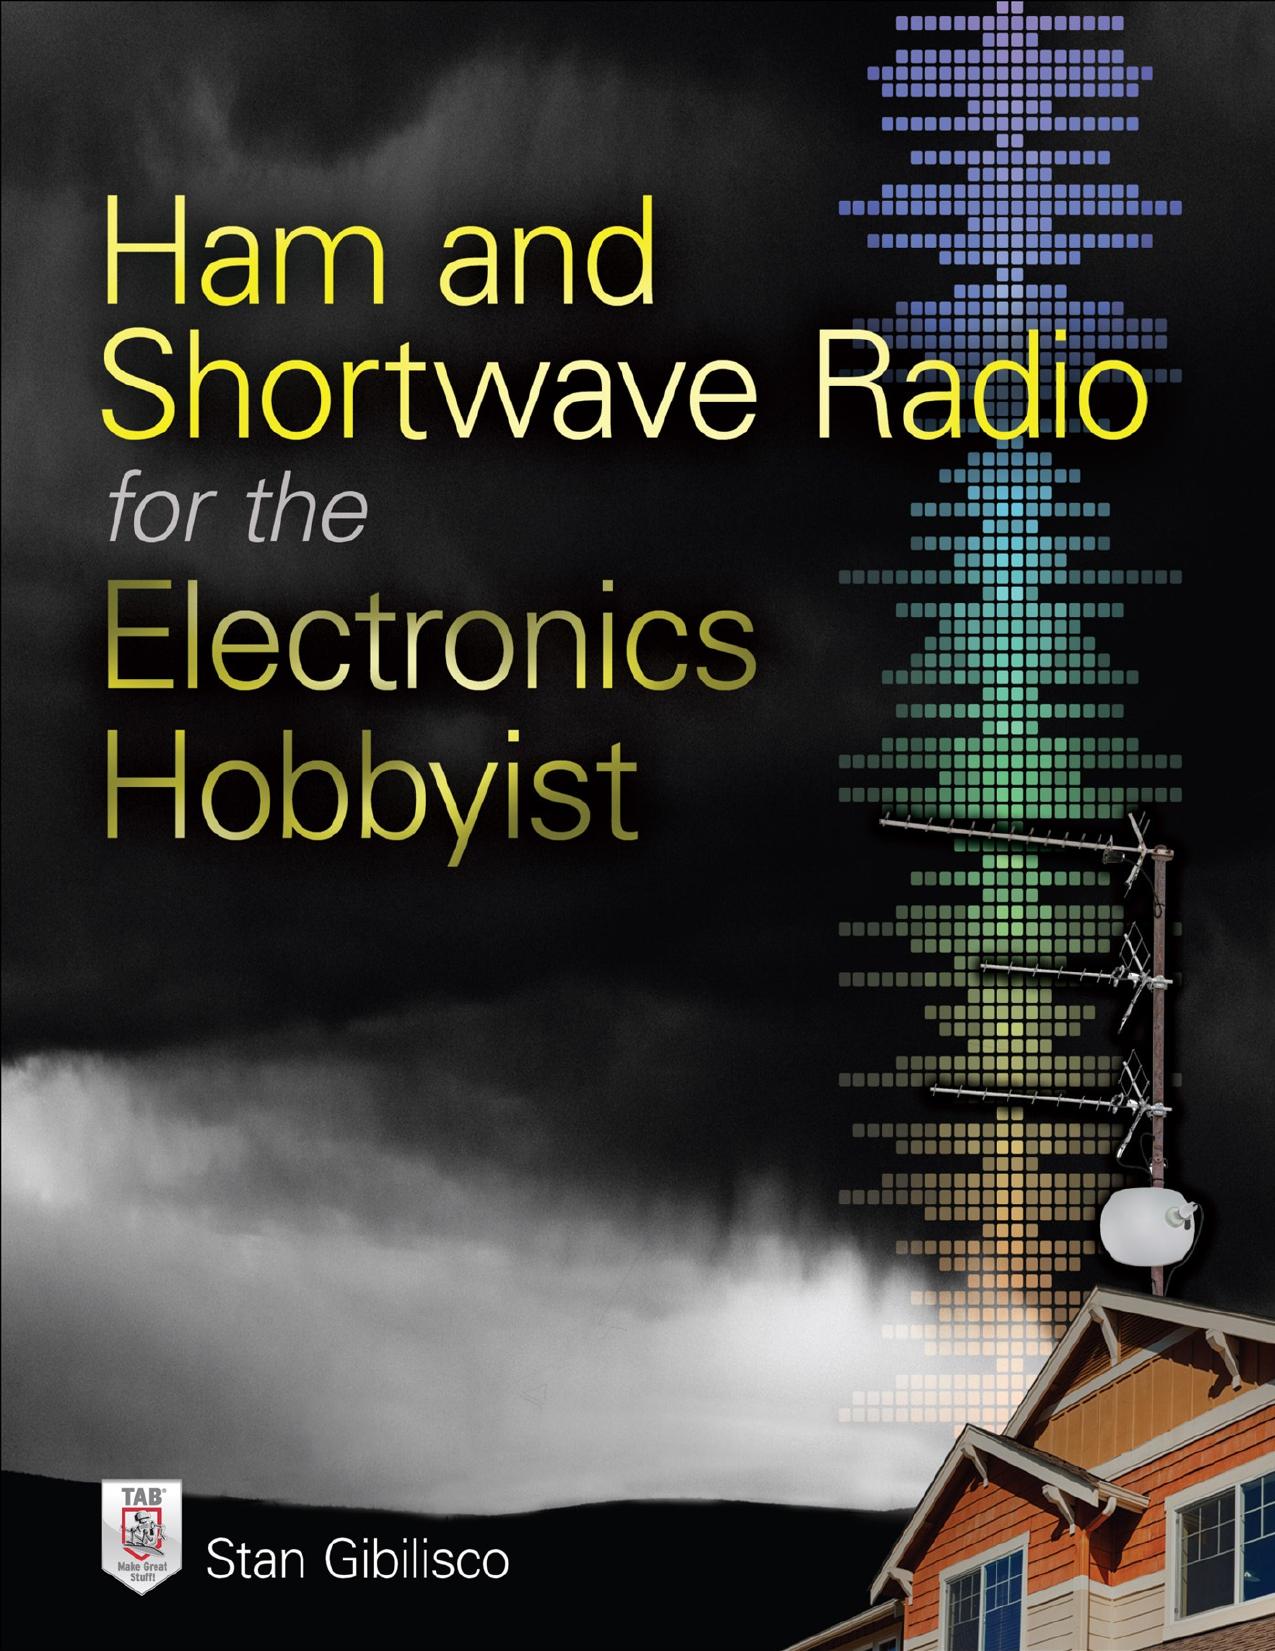 Ham and Shortwave Radio for the Electronics Hobbyist by Stan Gibilisco